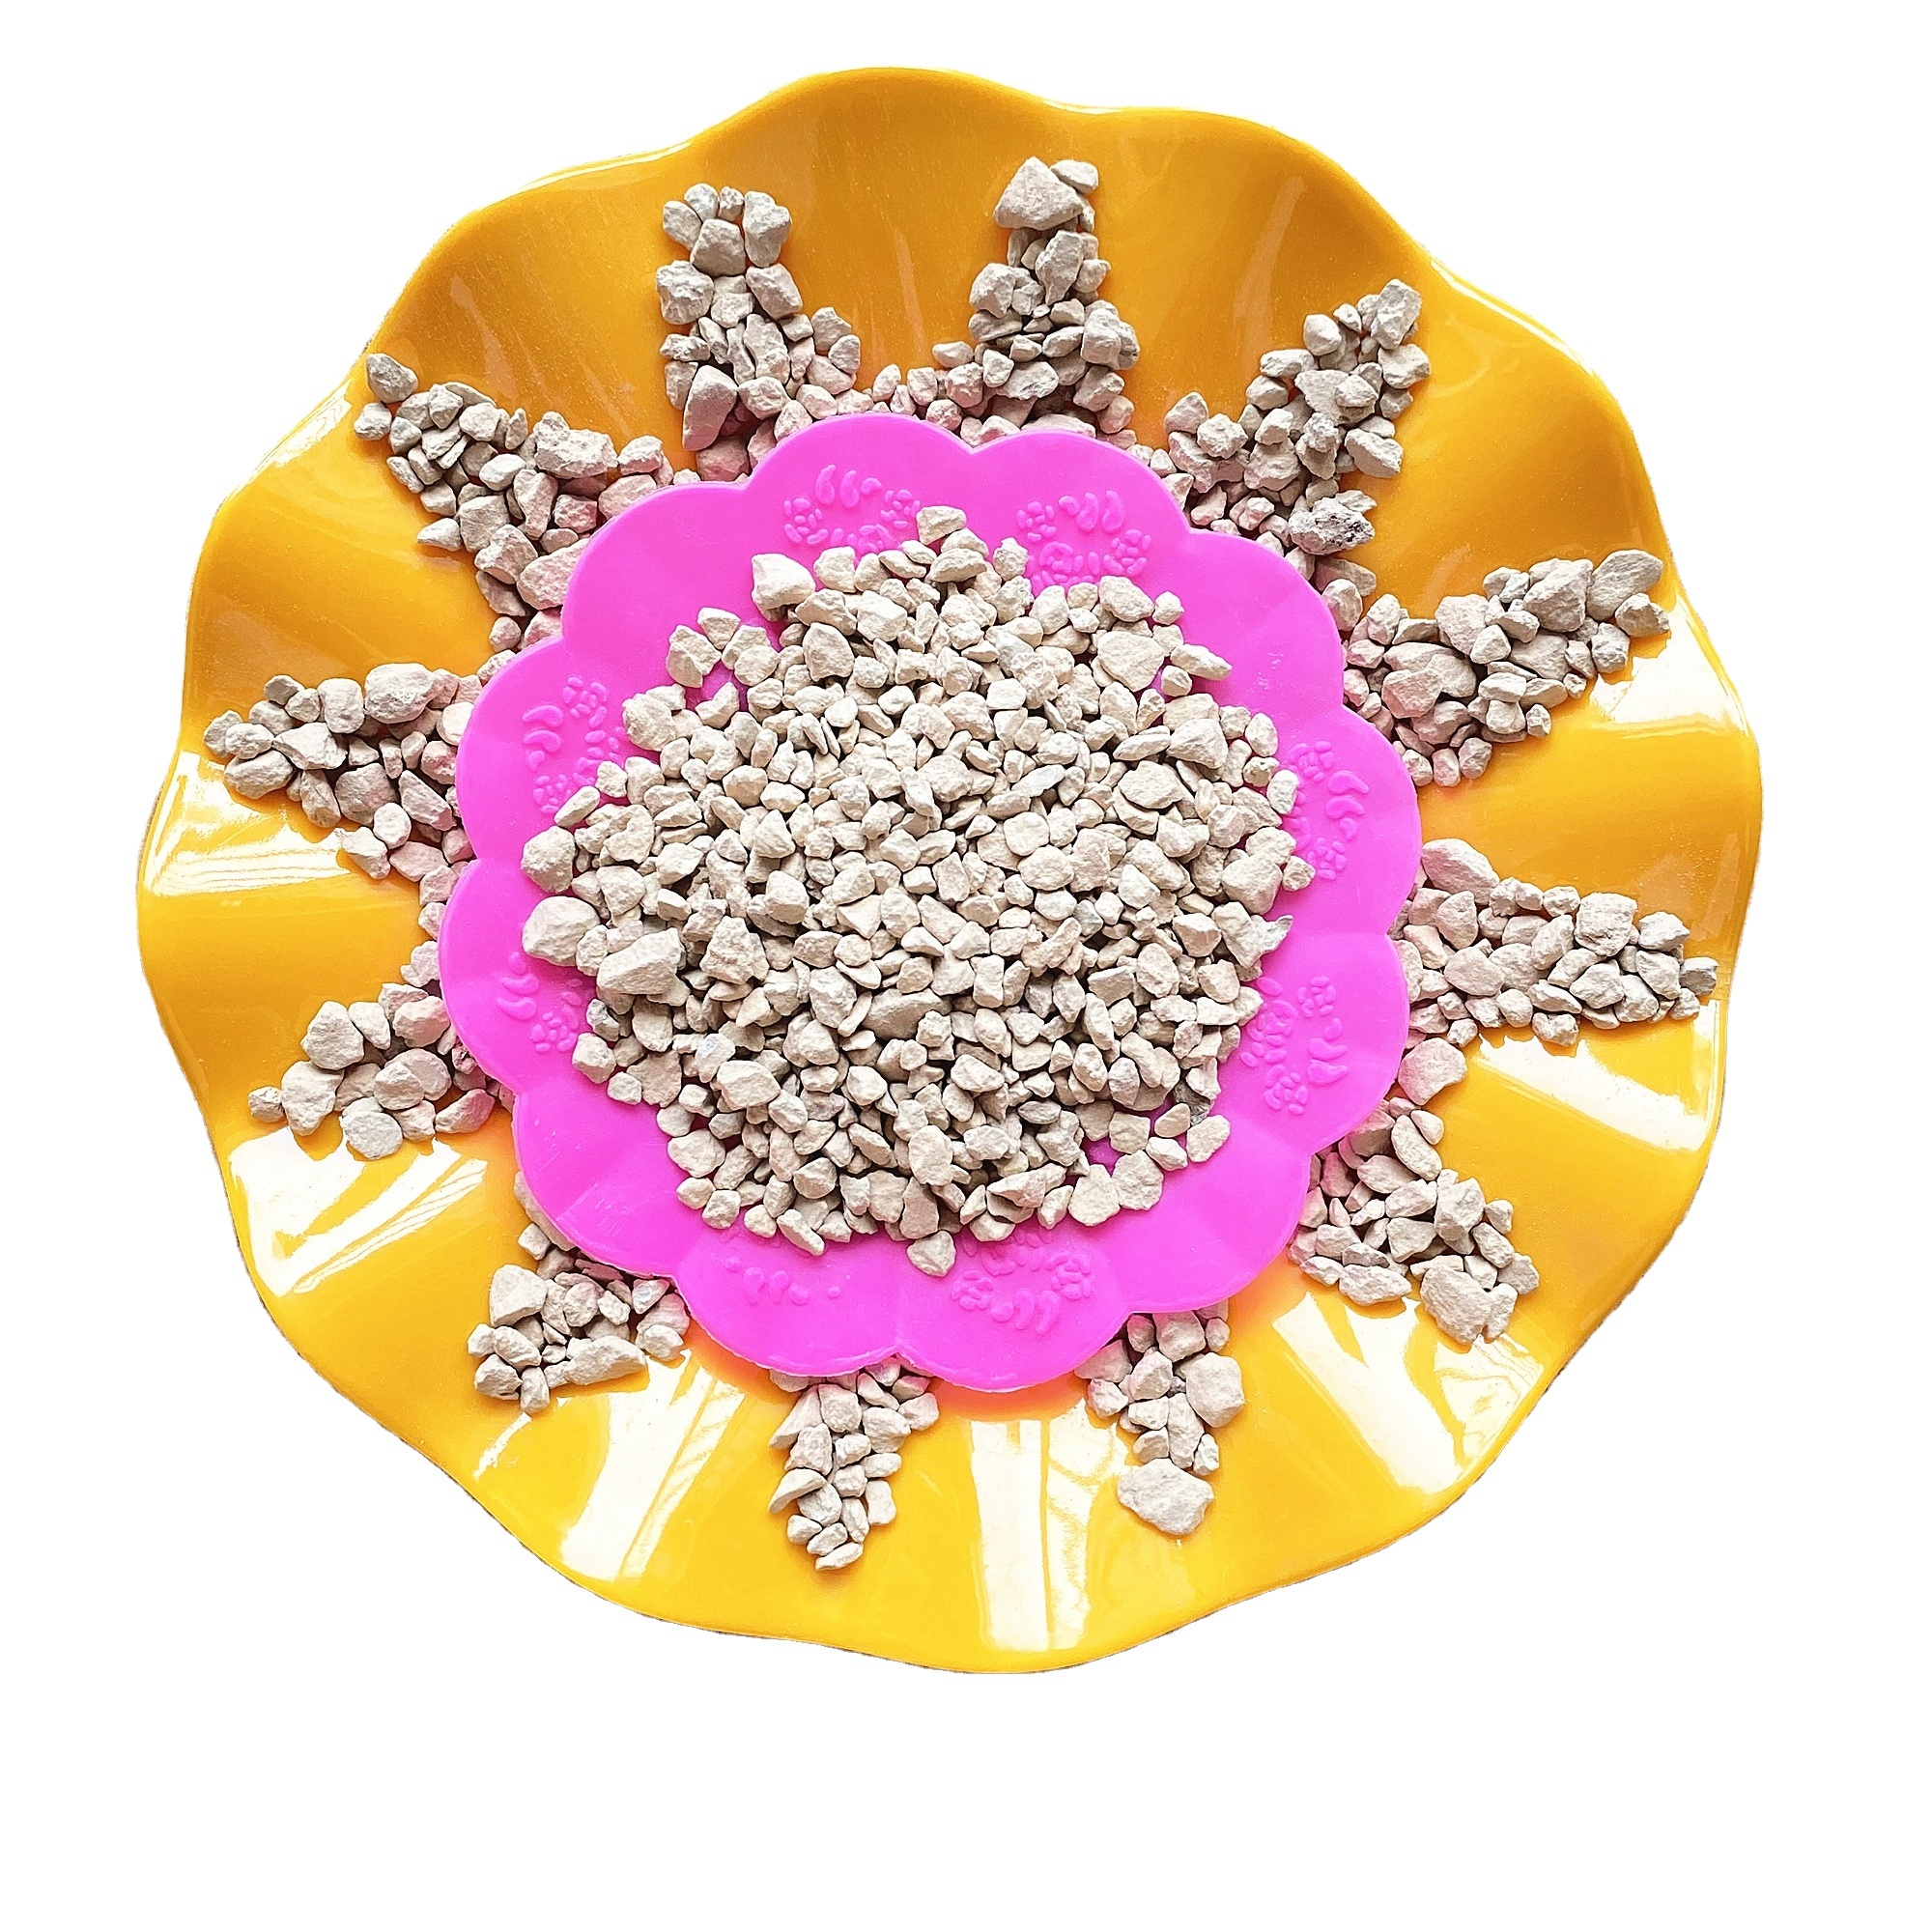 The factory supplies diatomite particles for horticultural planting and diatomite for soil improvement